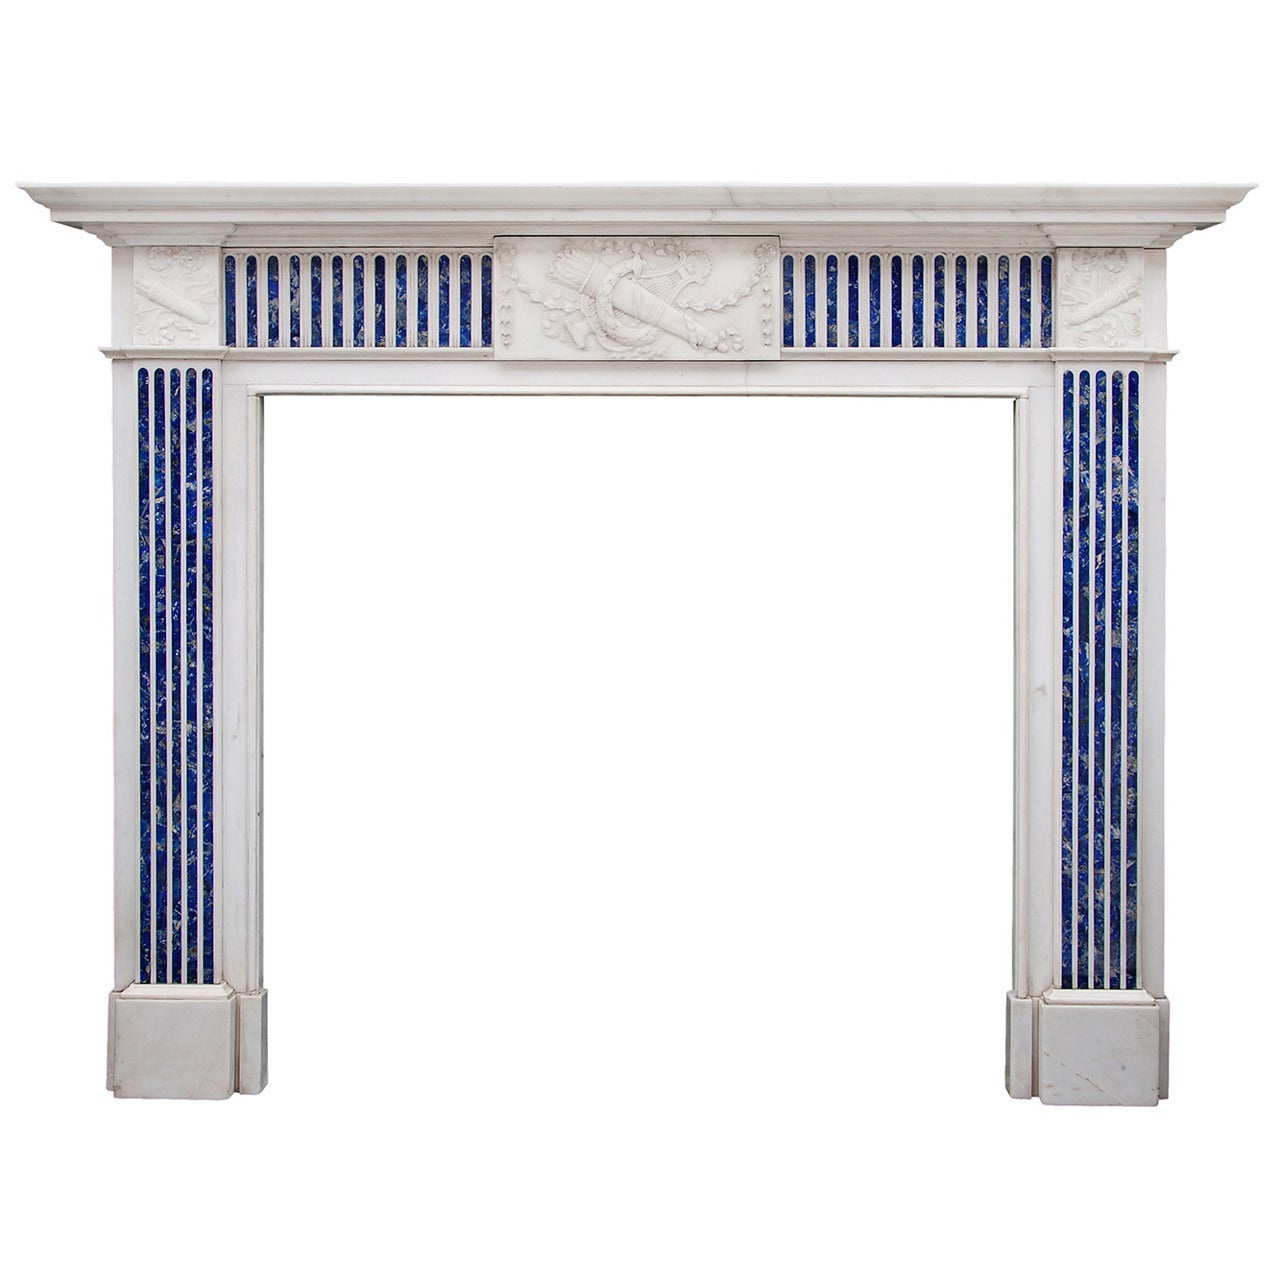 English Statuary and Inlaid Princess Blue Marble Fireplace Mantel For Sale